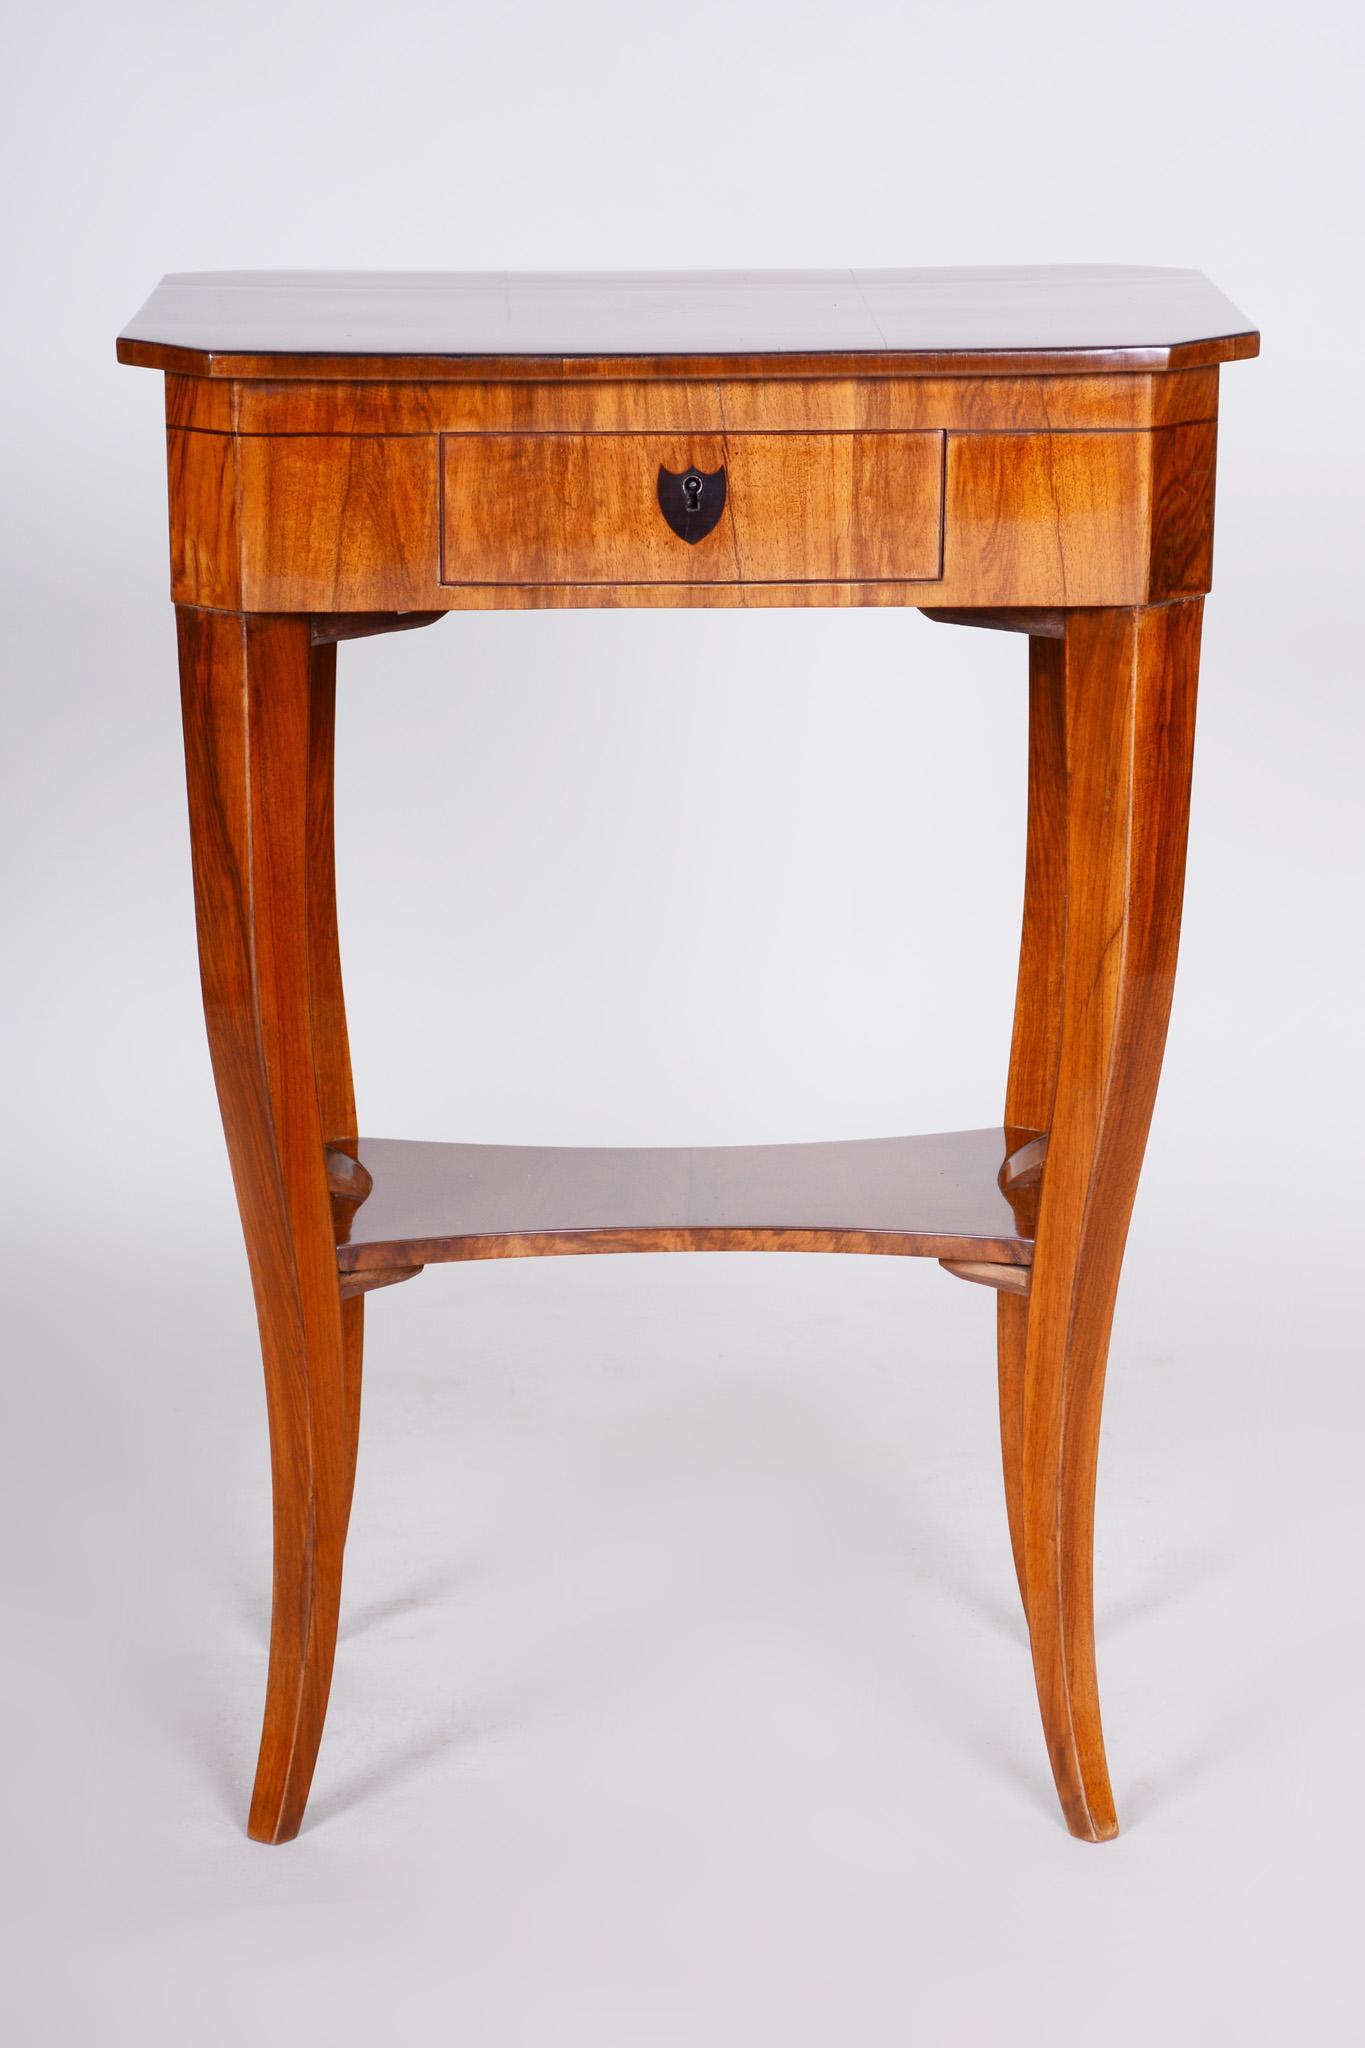 Shipping to any US port only for $290 USD

Austrian Biedermeier small table
Period: 1810-1819
Material: Walnut
Shellac polished.

We guarantee safe a the cheapest air transport from Europe to the whole world within 7 days.
The price is the same as